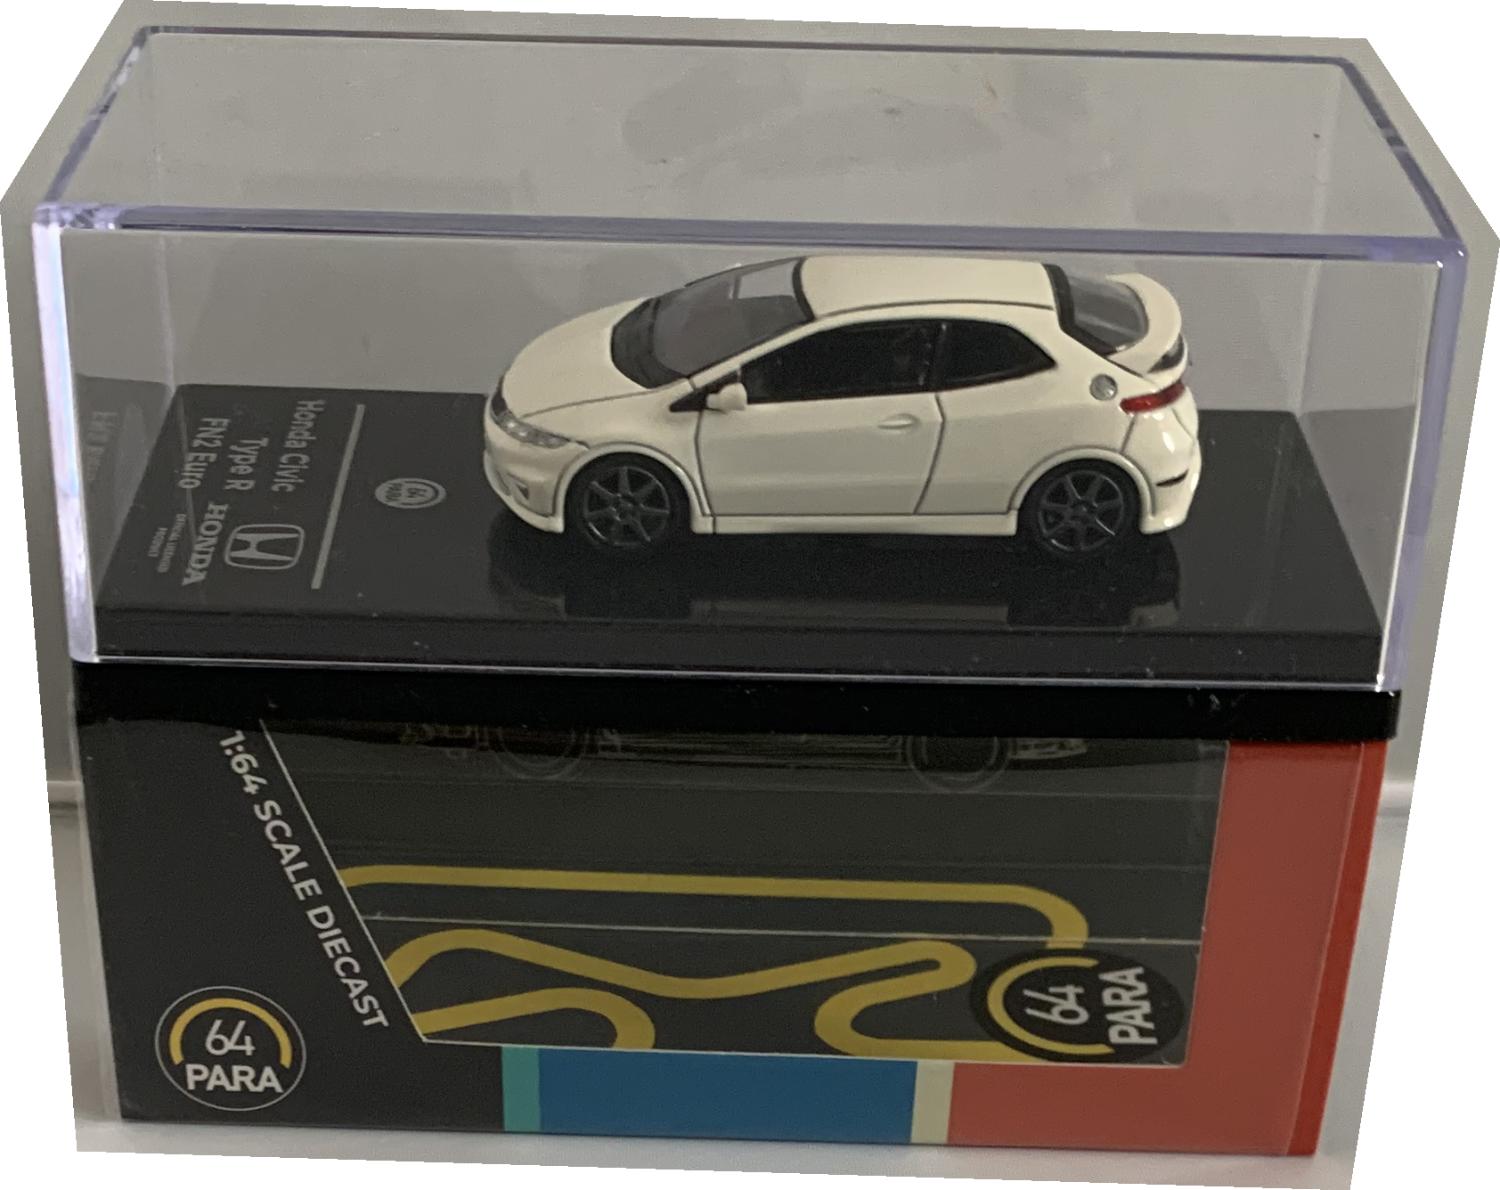 A good reproduction of the Honda Civic Type R mounted on a removable plinth and a removable hard plastic cover